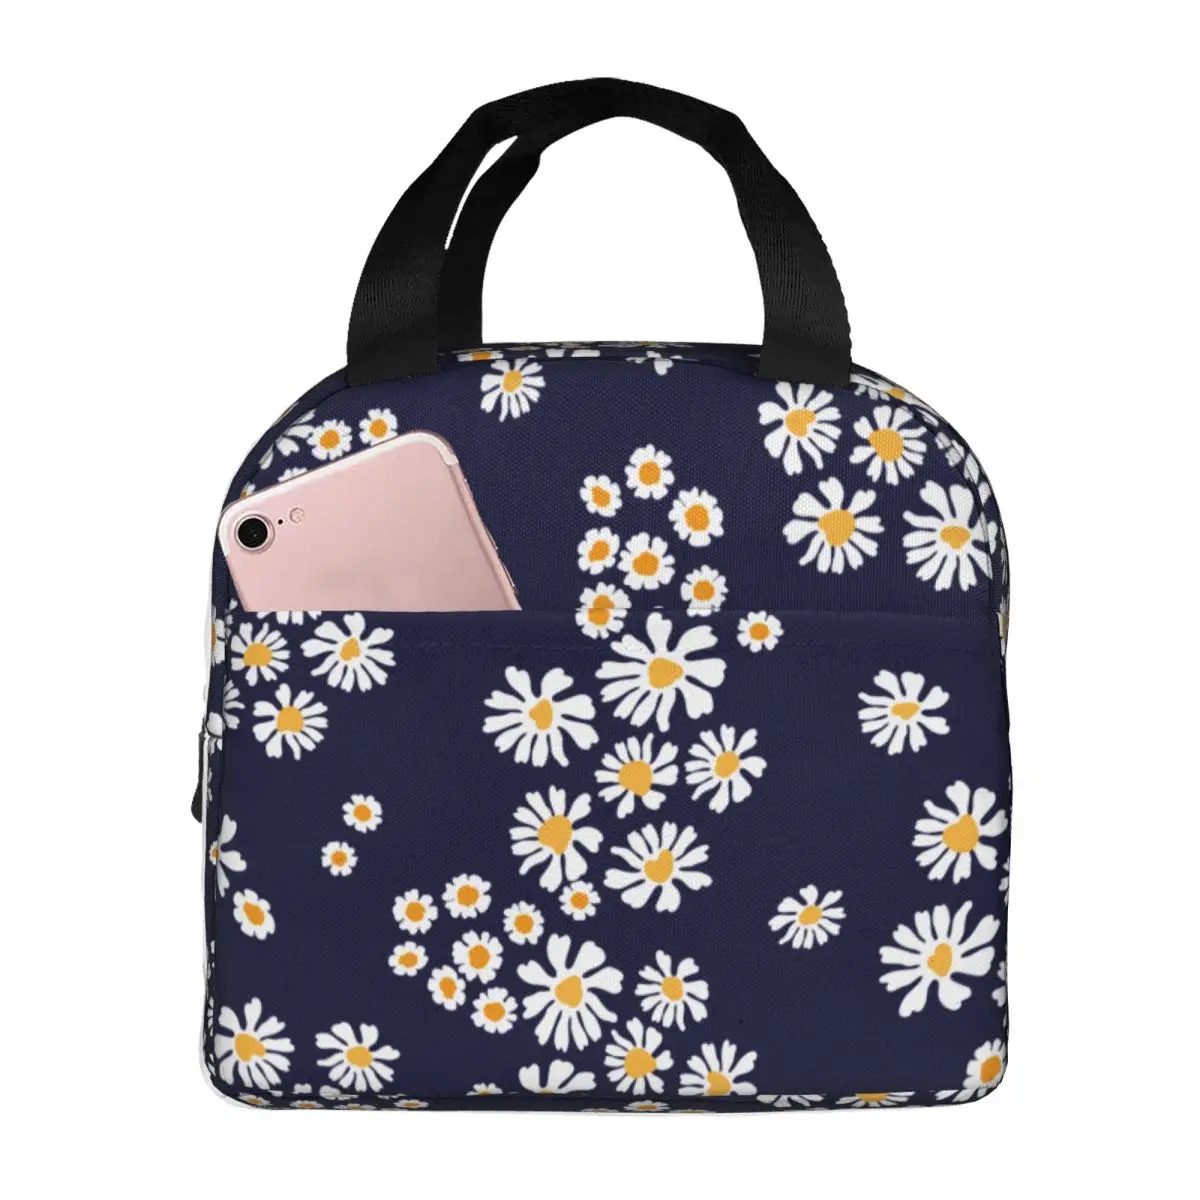 Daisy Flower Lunch Bag Portable Insulated Oxford Cooler Bags Thermal Cold Food Picnic Lunch Box for Women Kids